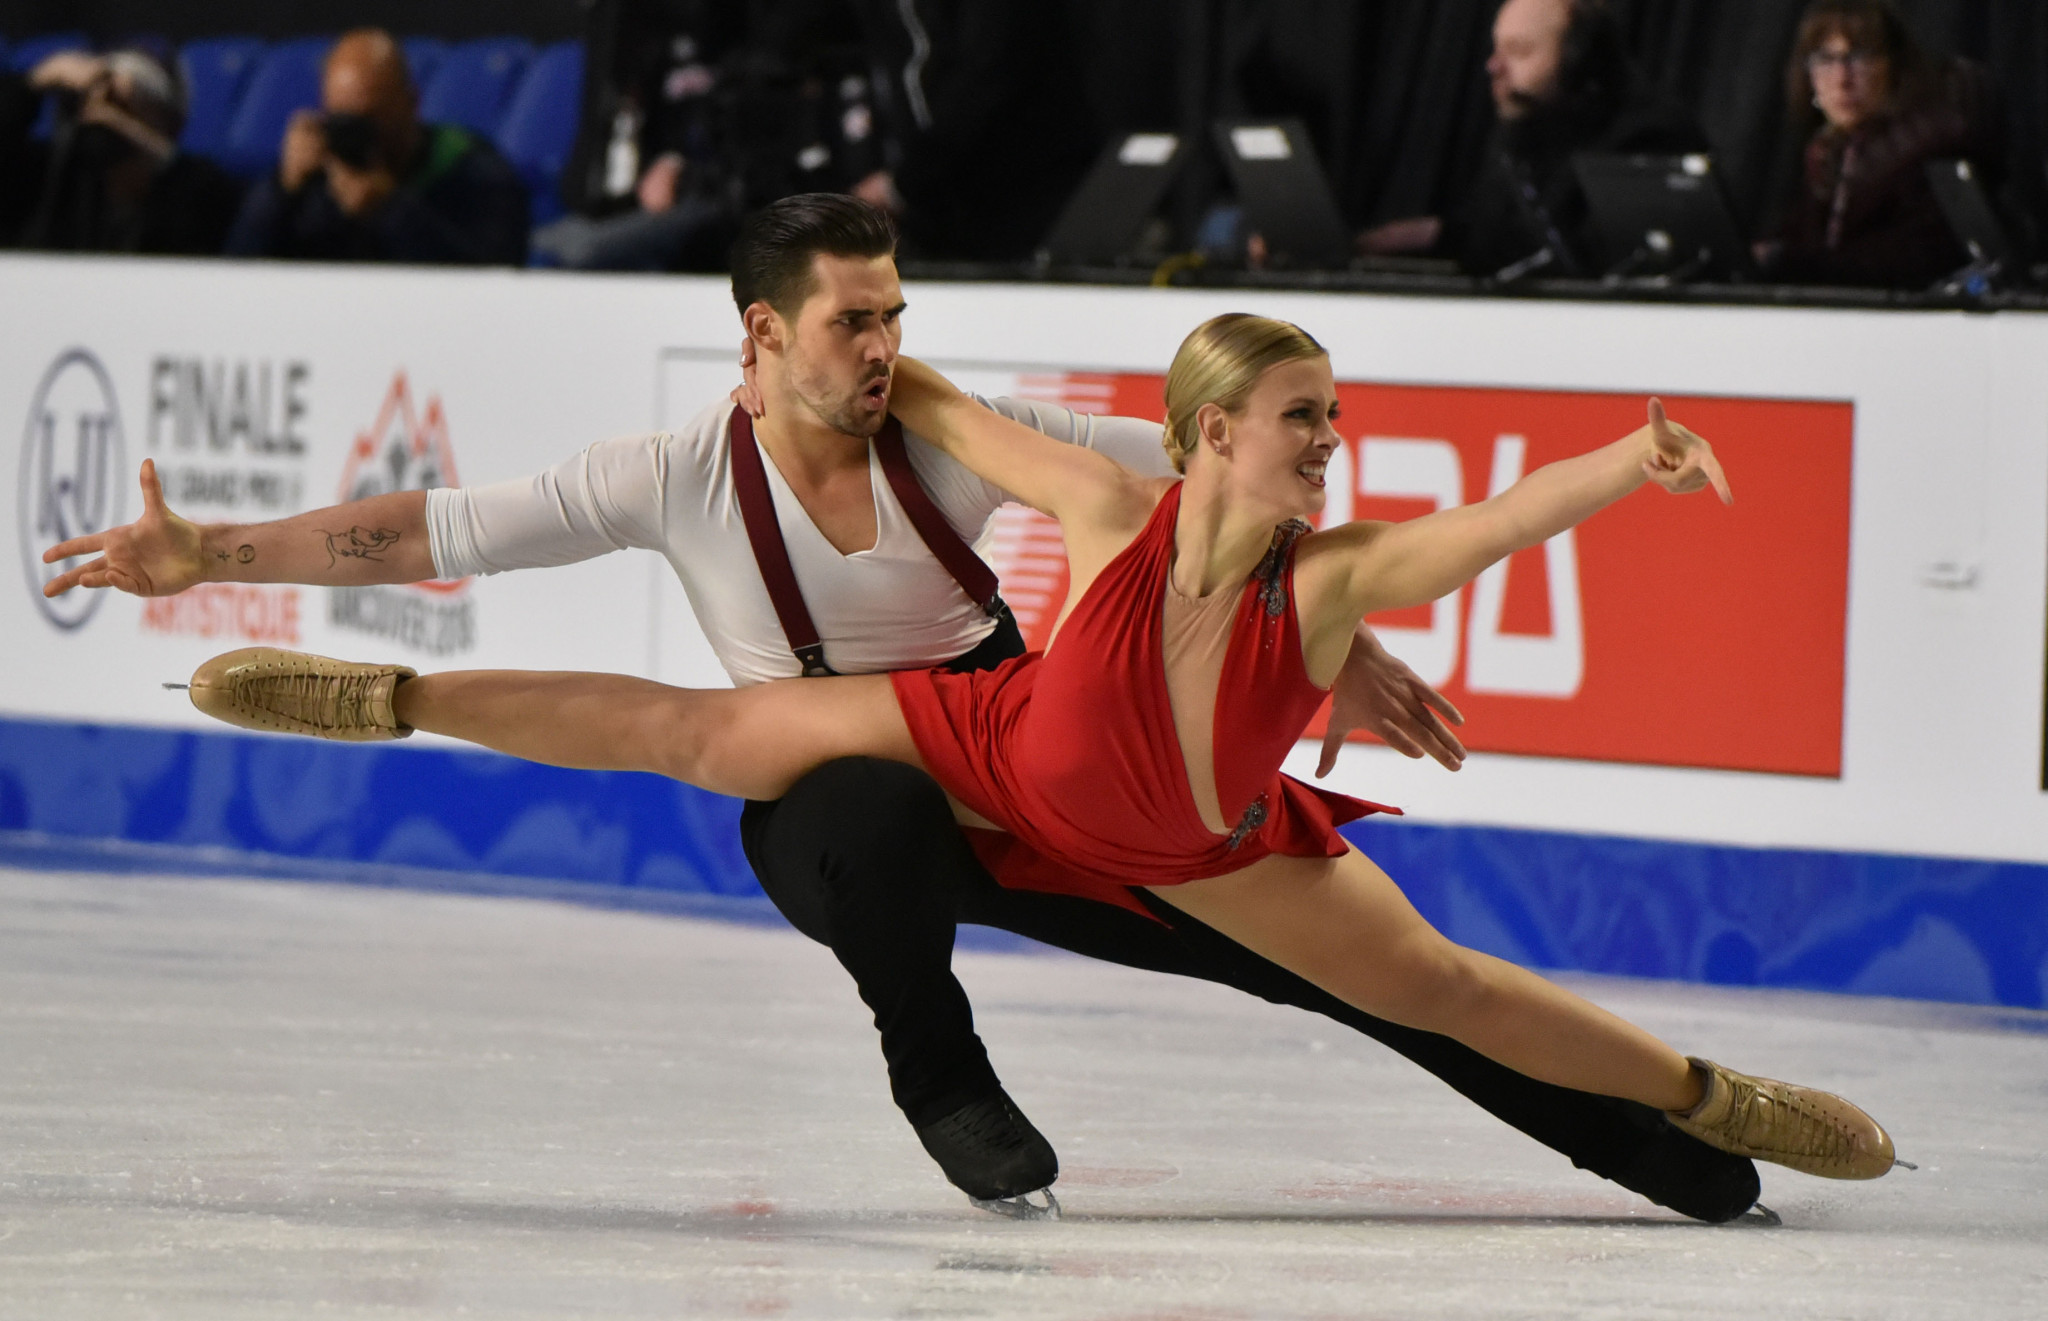 Grand Prix of Figure Skating events confirmed for next two seasons